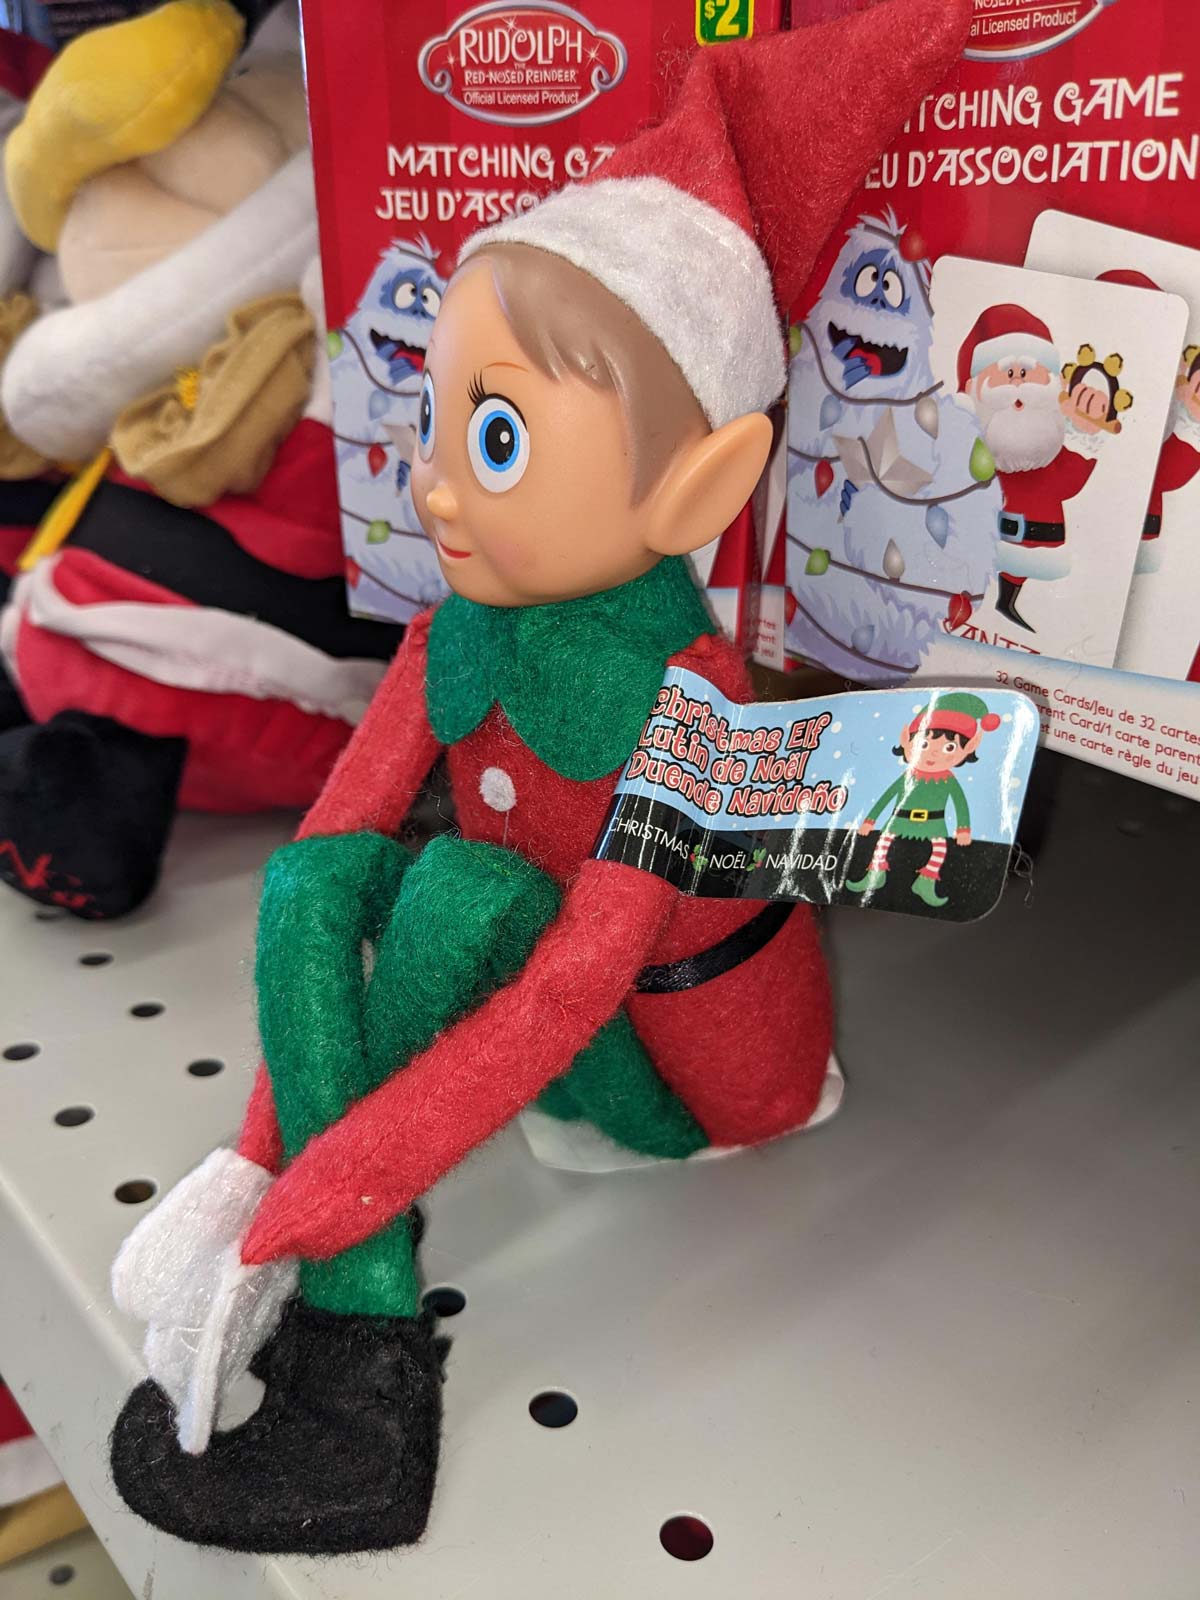 Knock-off elf on the shelf looks like it's seen some things